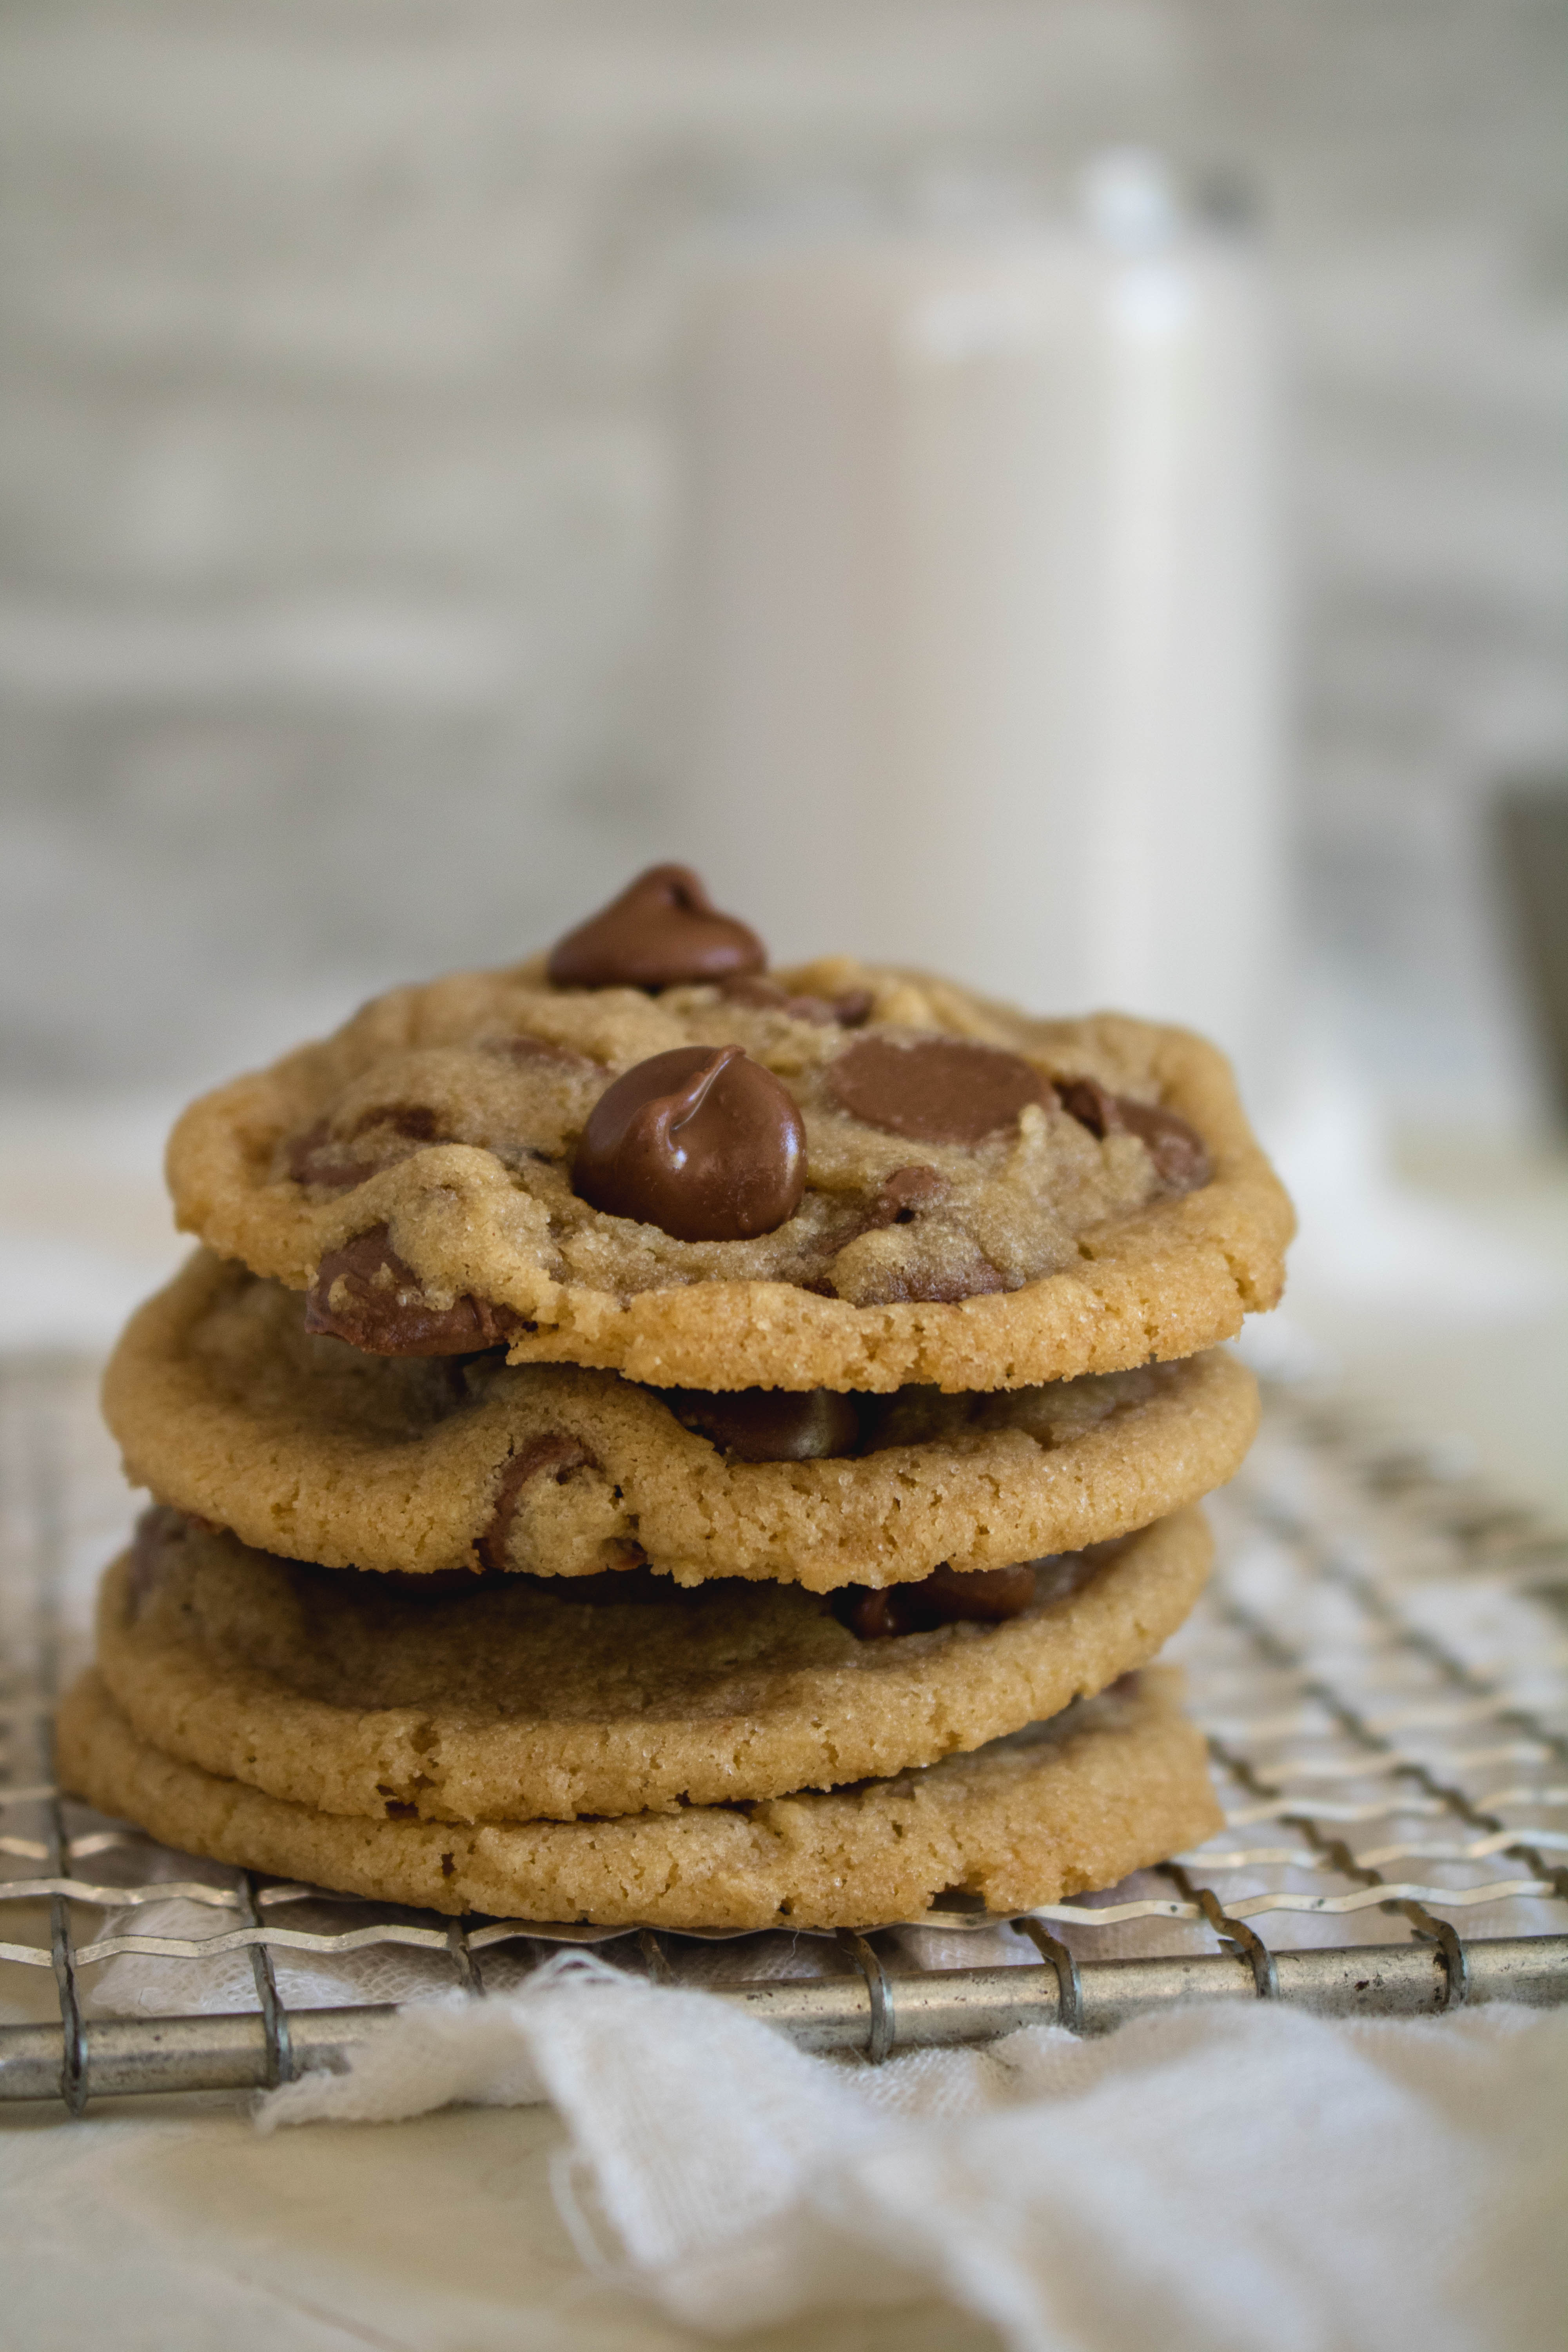 Stack of soft chocolate chip cookies